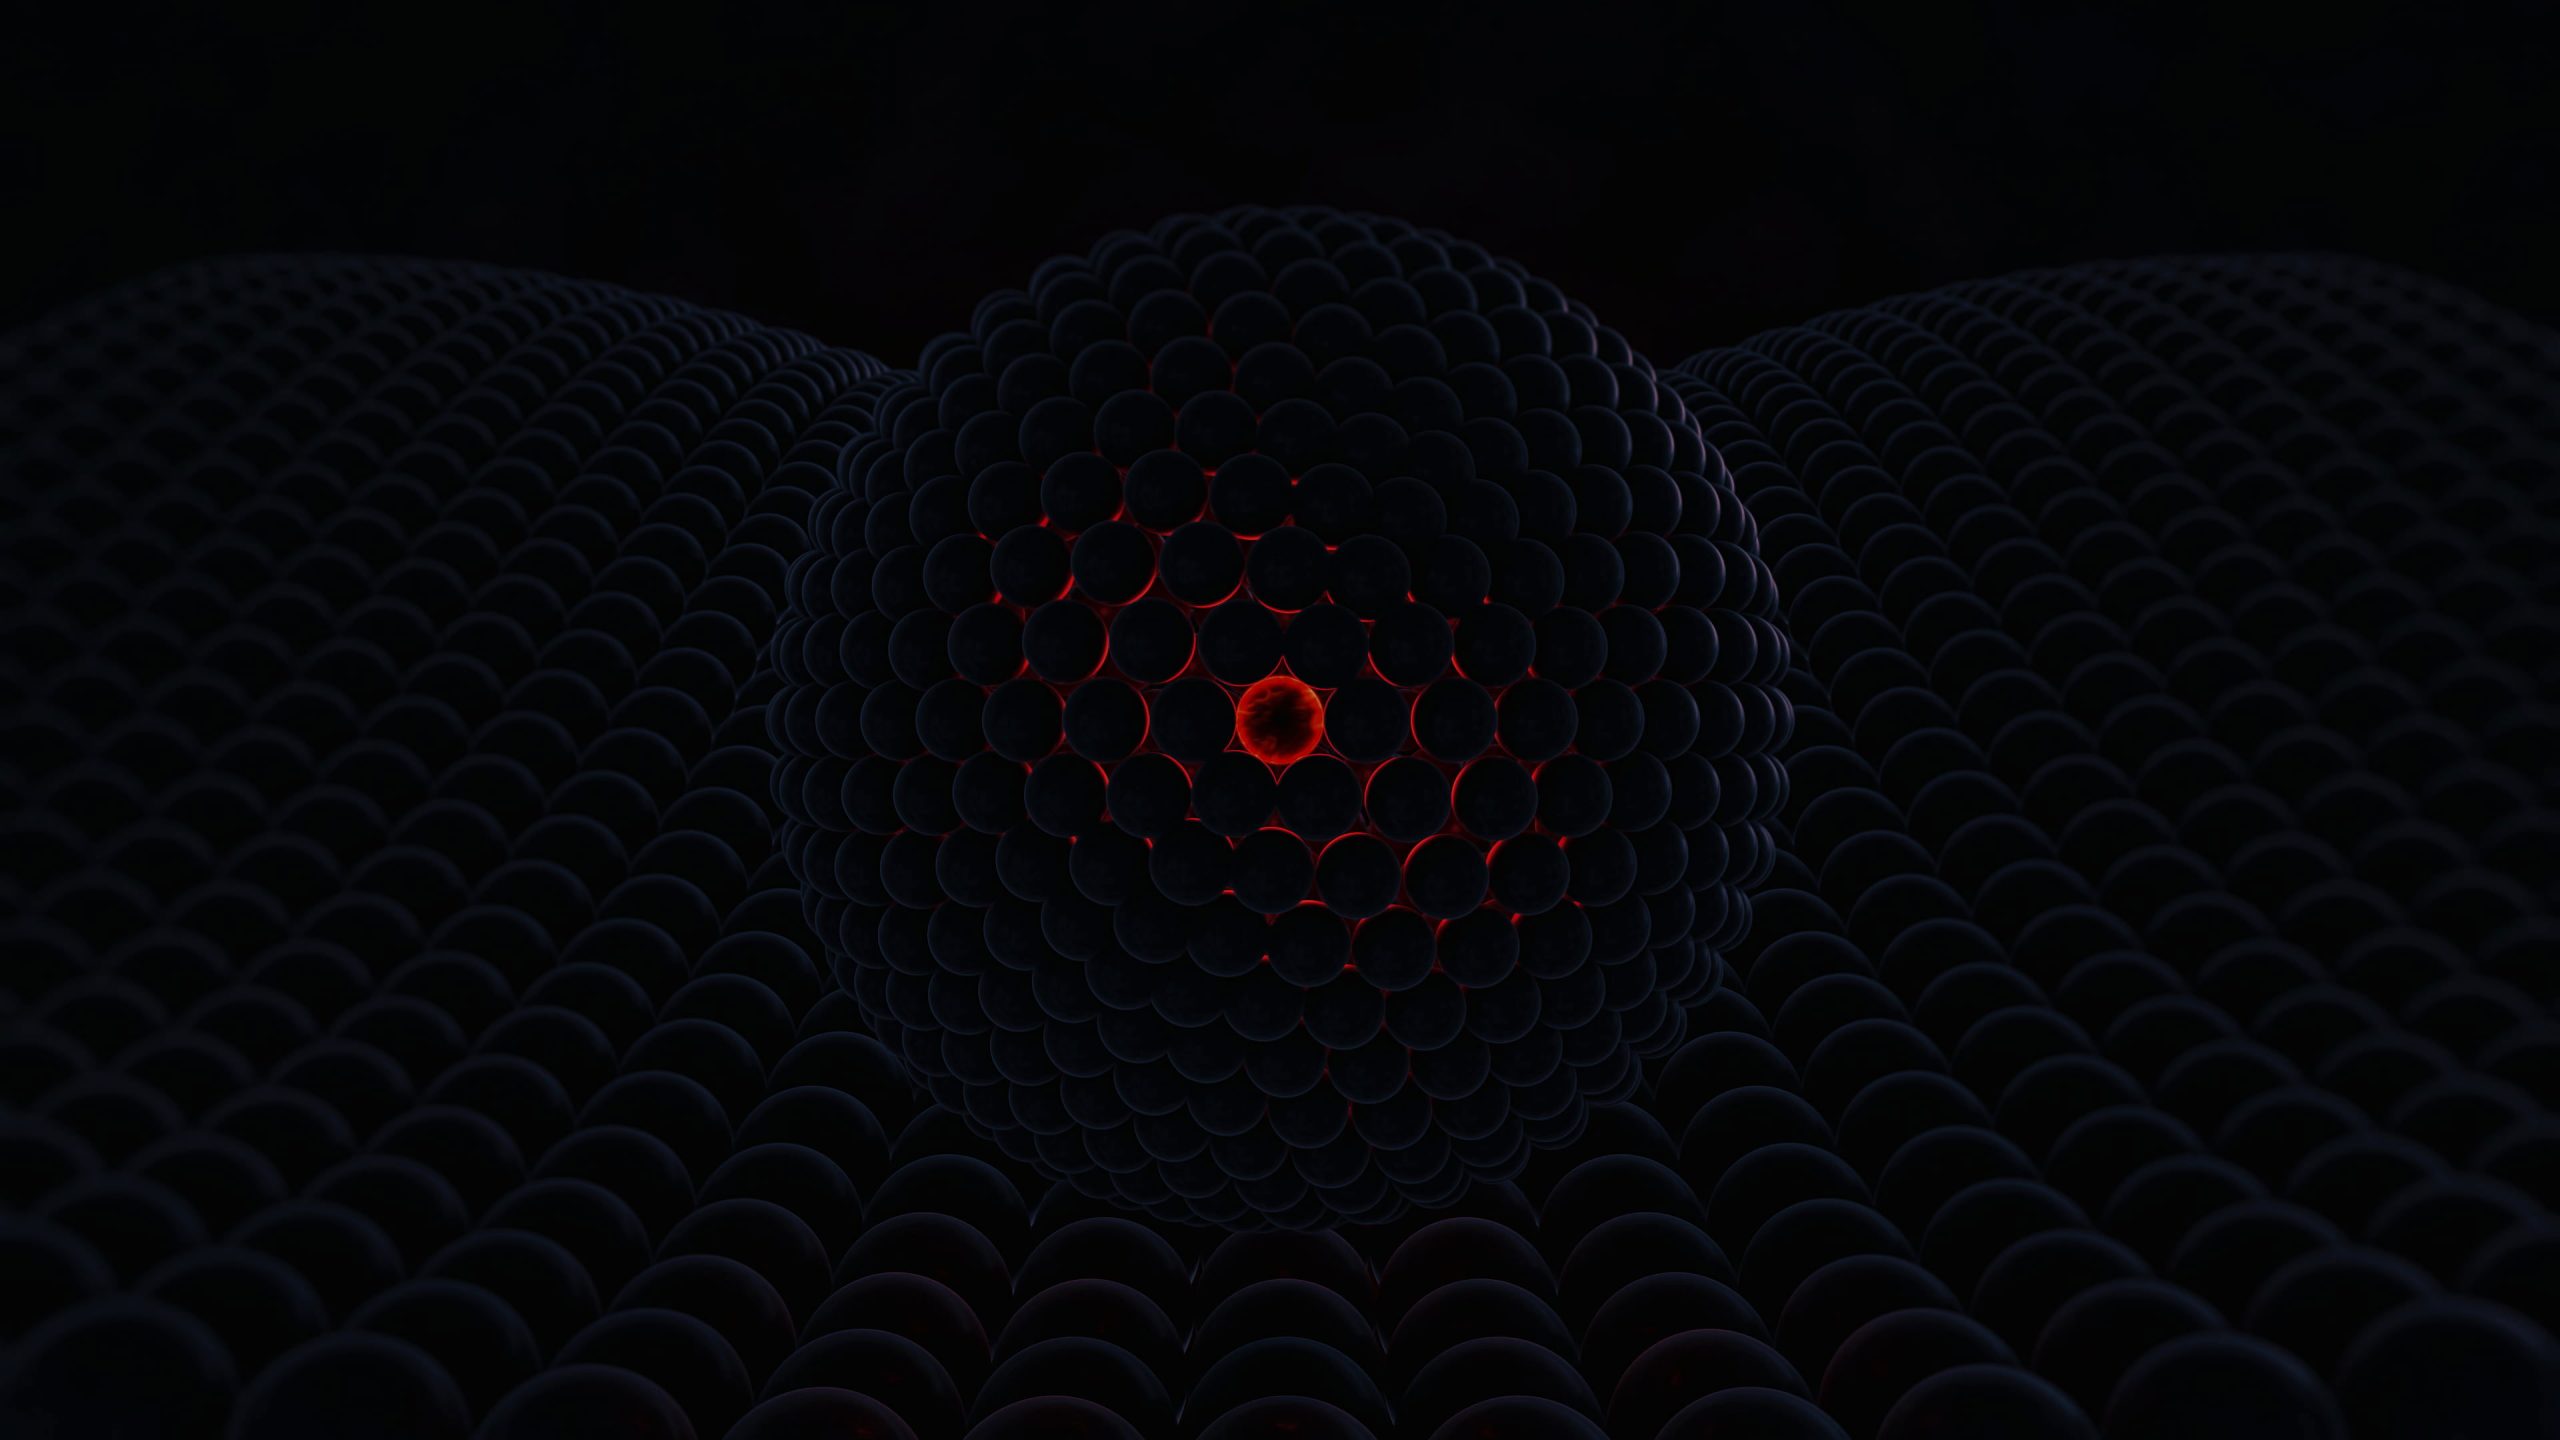 Orb wallpaper, abstract, 3D Abstract, glowing, dark, red, 3d design